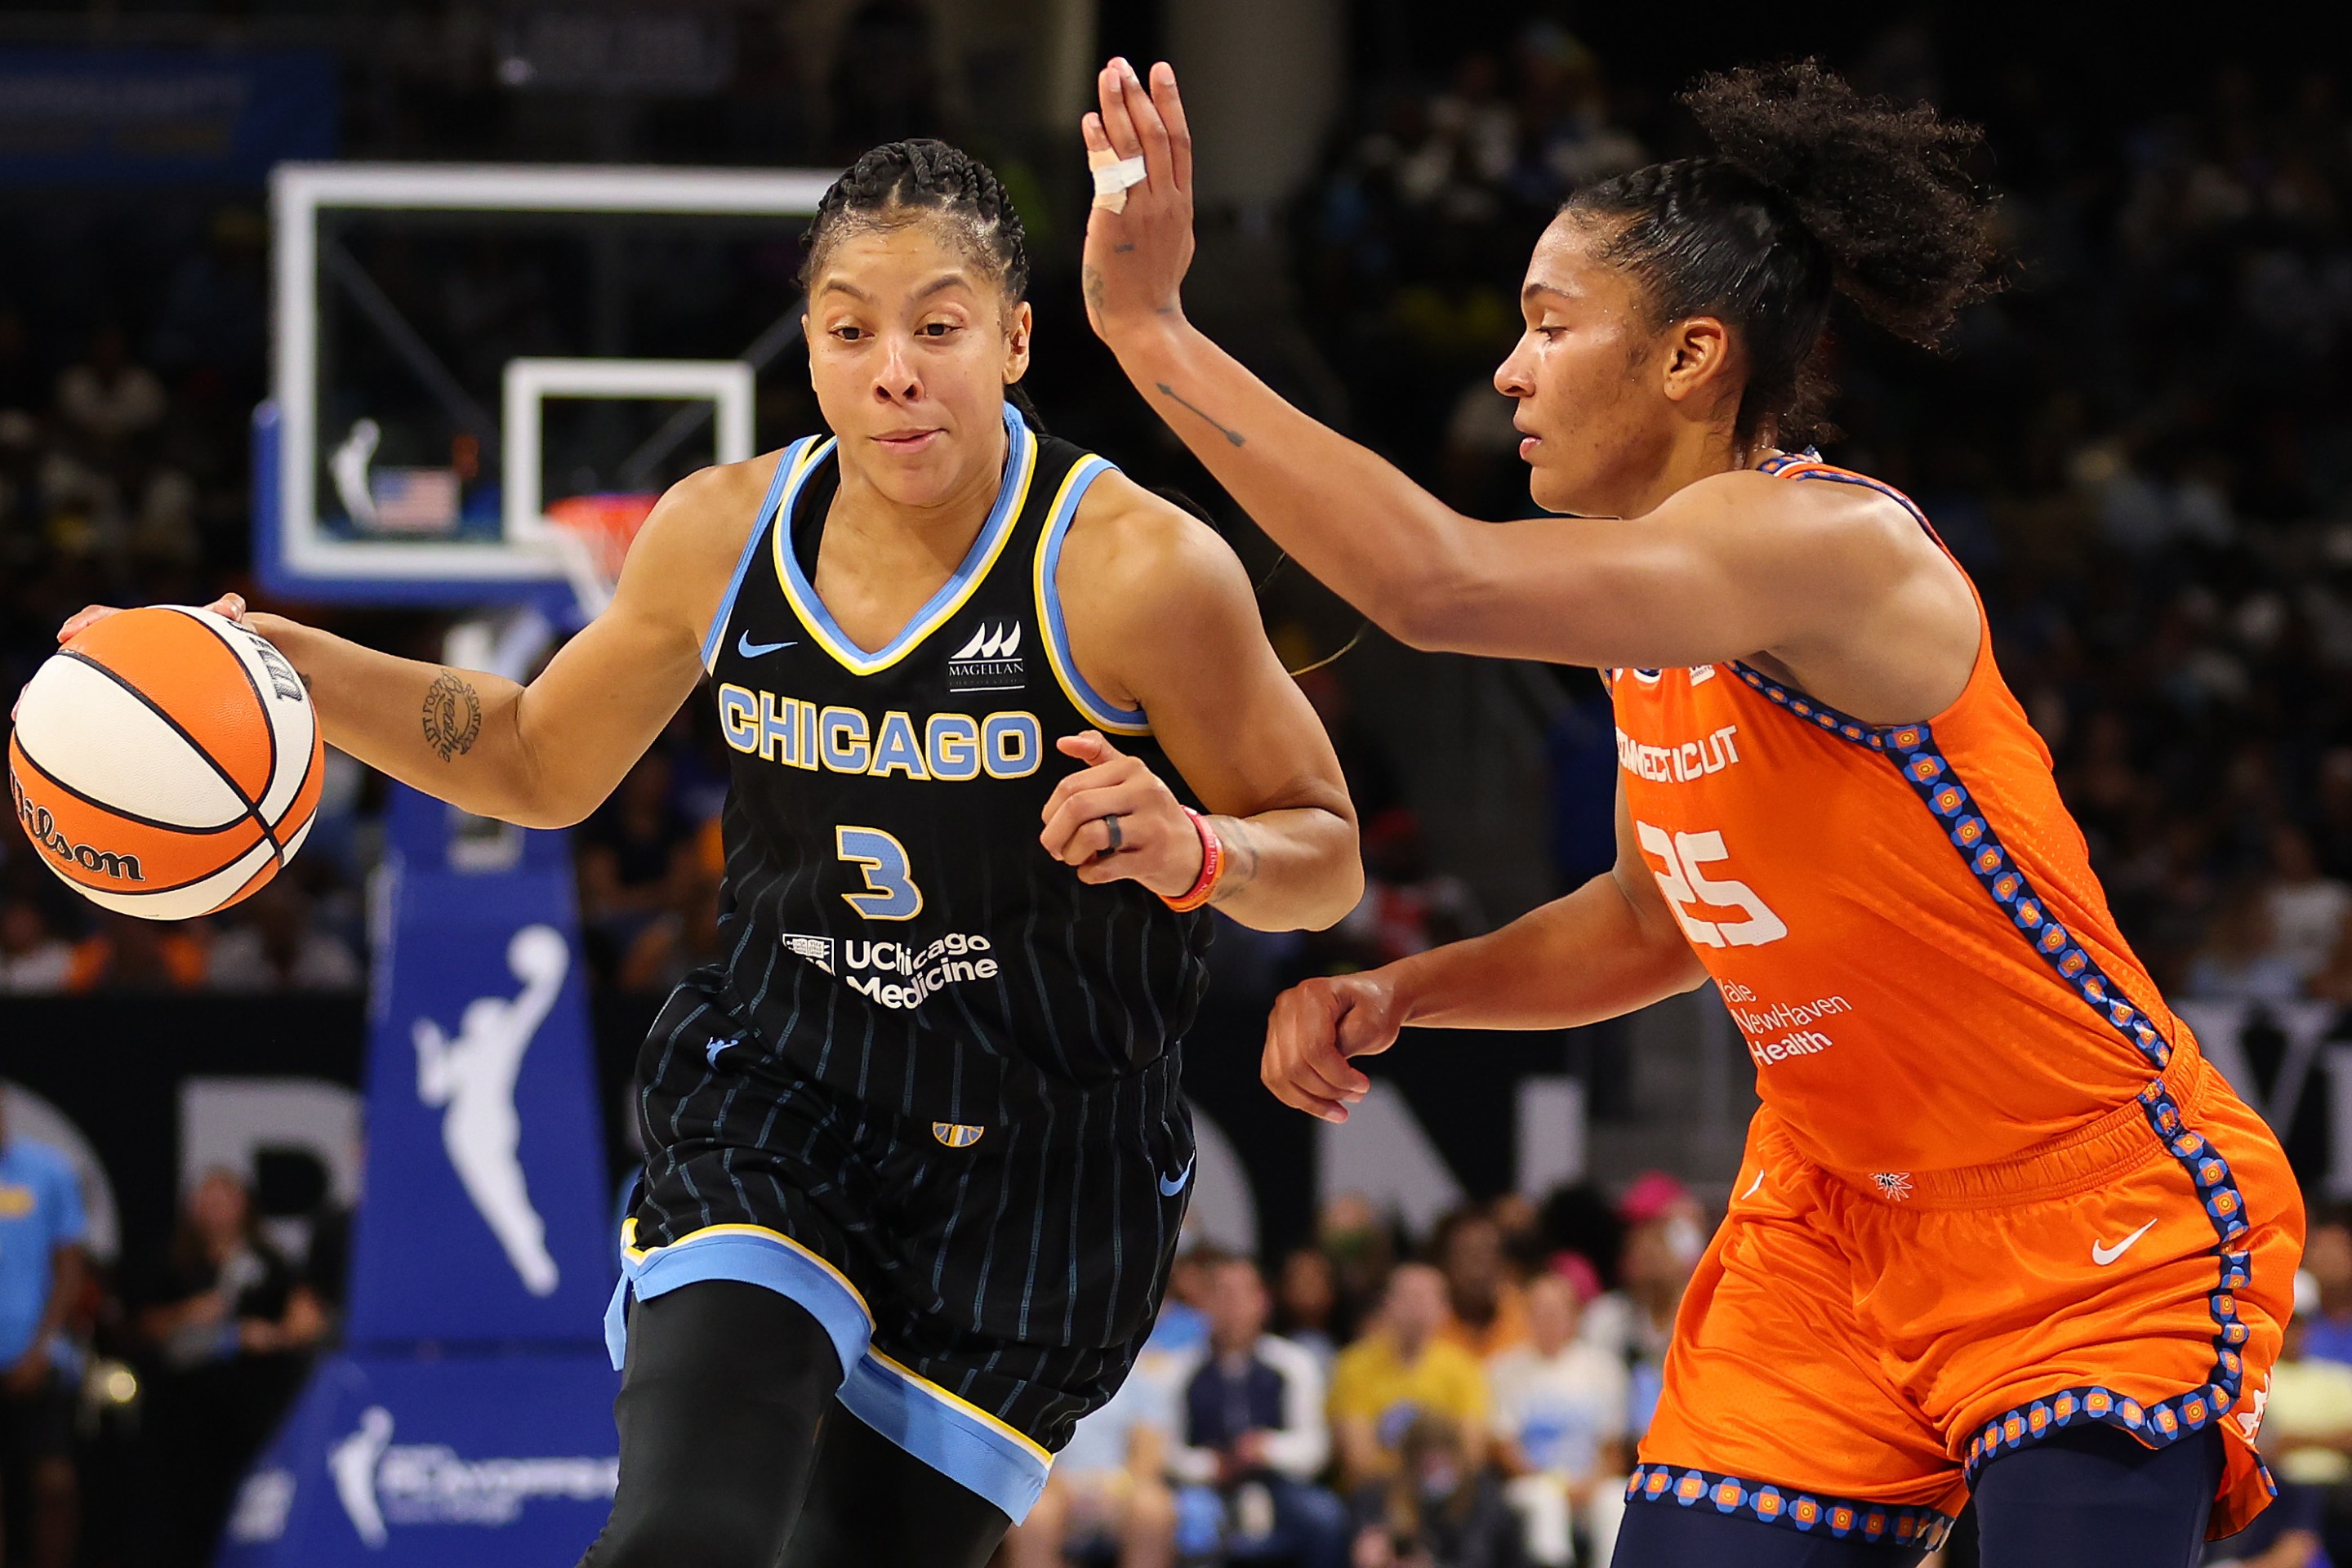 CHICAGO, ILLINOIS - AUGUST 31: Candace Parker #3 of the Chicago Sky drives to the basket against Alyssa Thomas #25 of the Connecticut Sun during the first half in Game Two of the 2022 WNBA Playoffs semifinals at Wintrust Arena on August 31, 2022 in Chicago, Illinois.